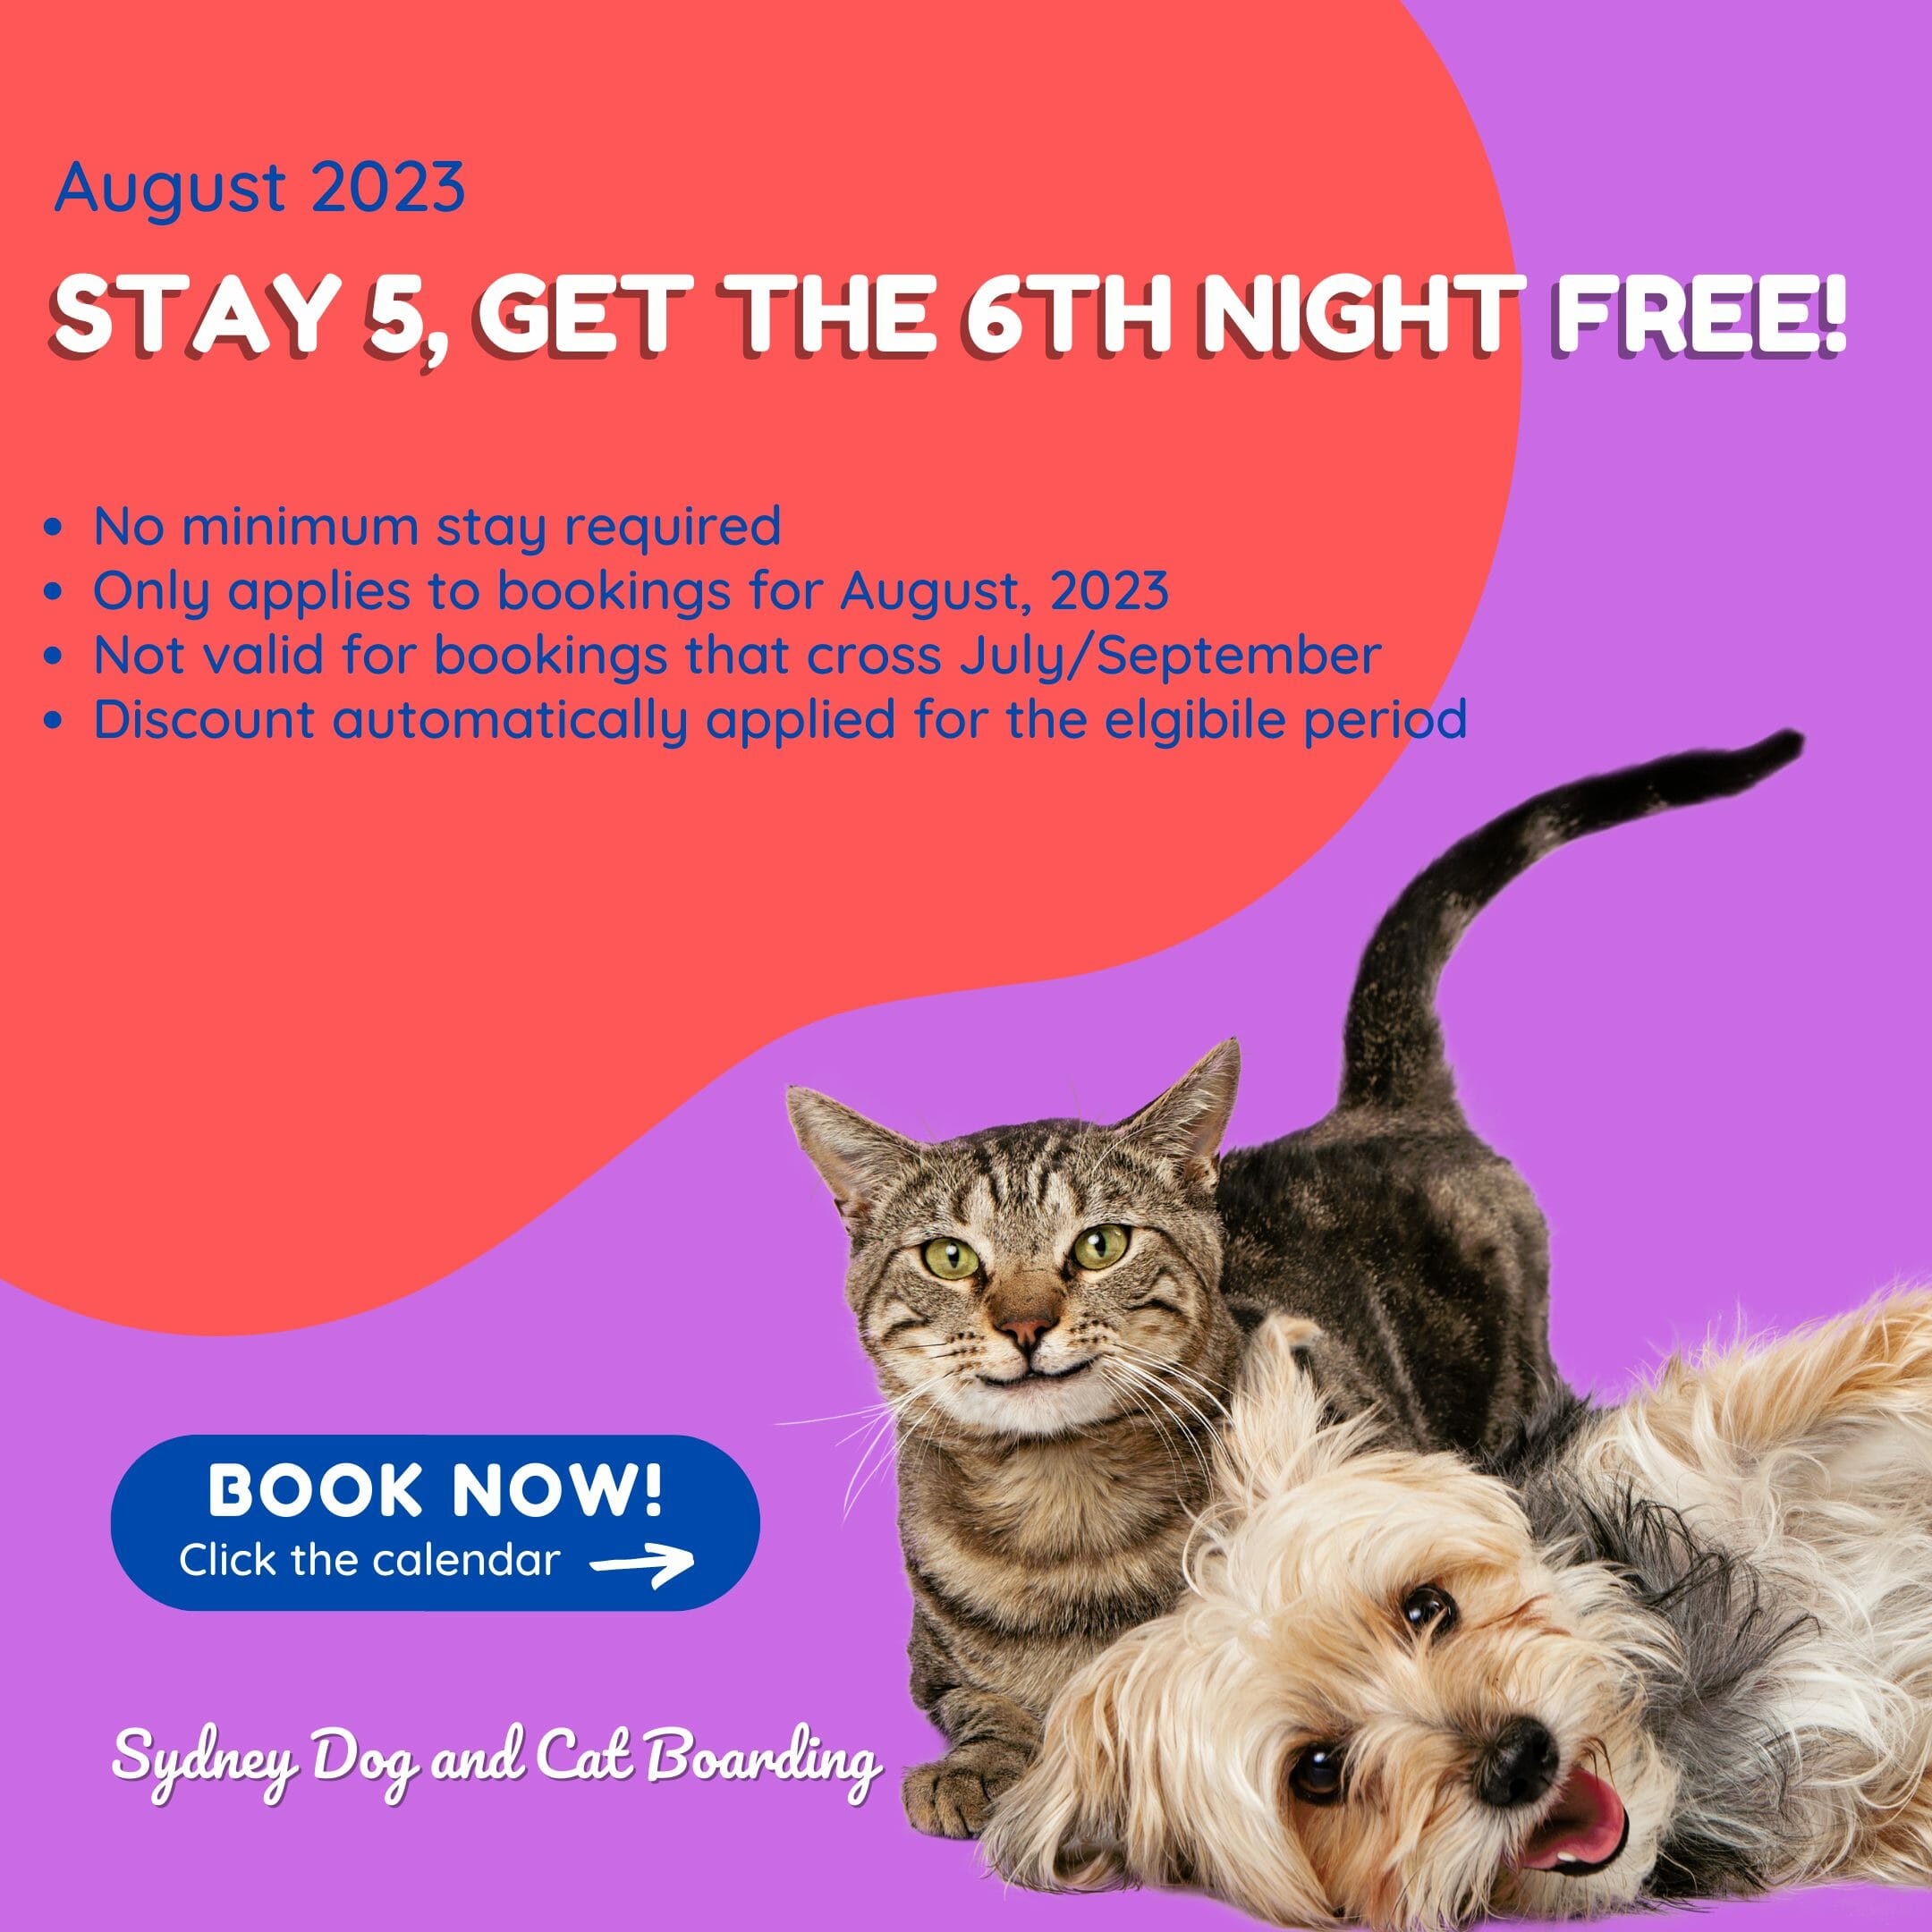 Dog and Cat Boarding - August Special - Book 5 nights and stay the 6th night for free at Sydney Dog and Cat Boarding